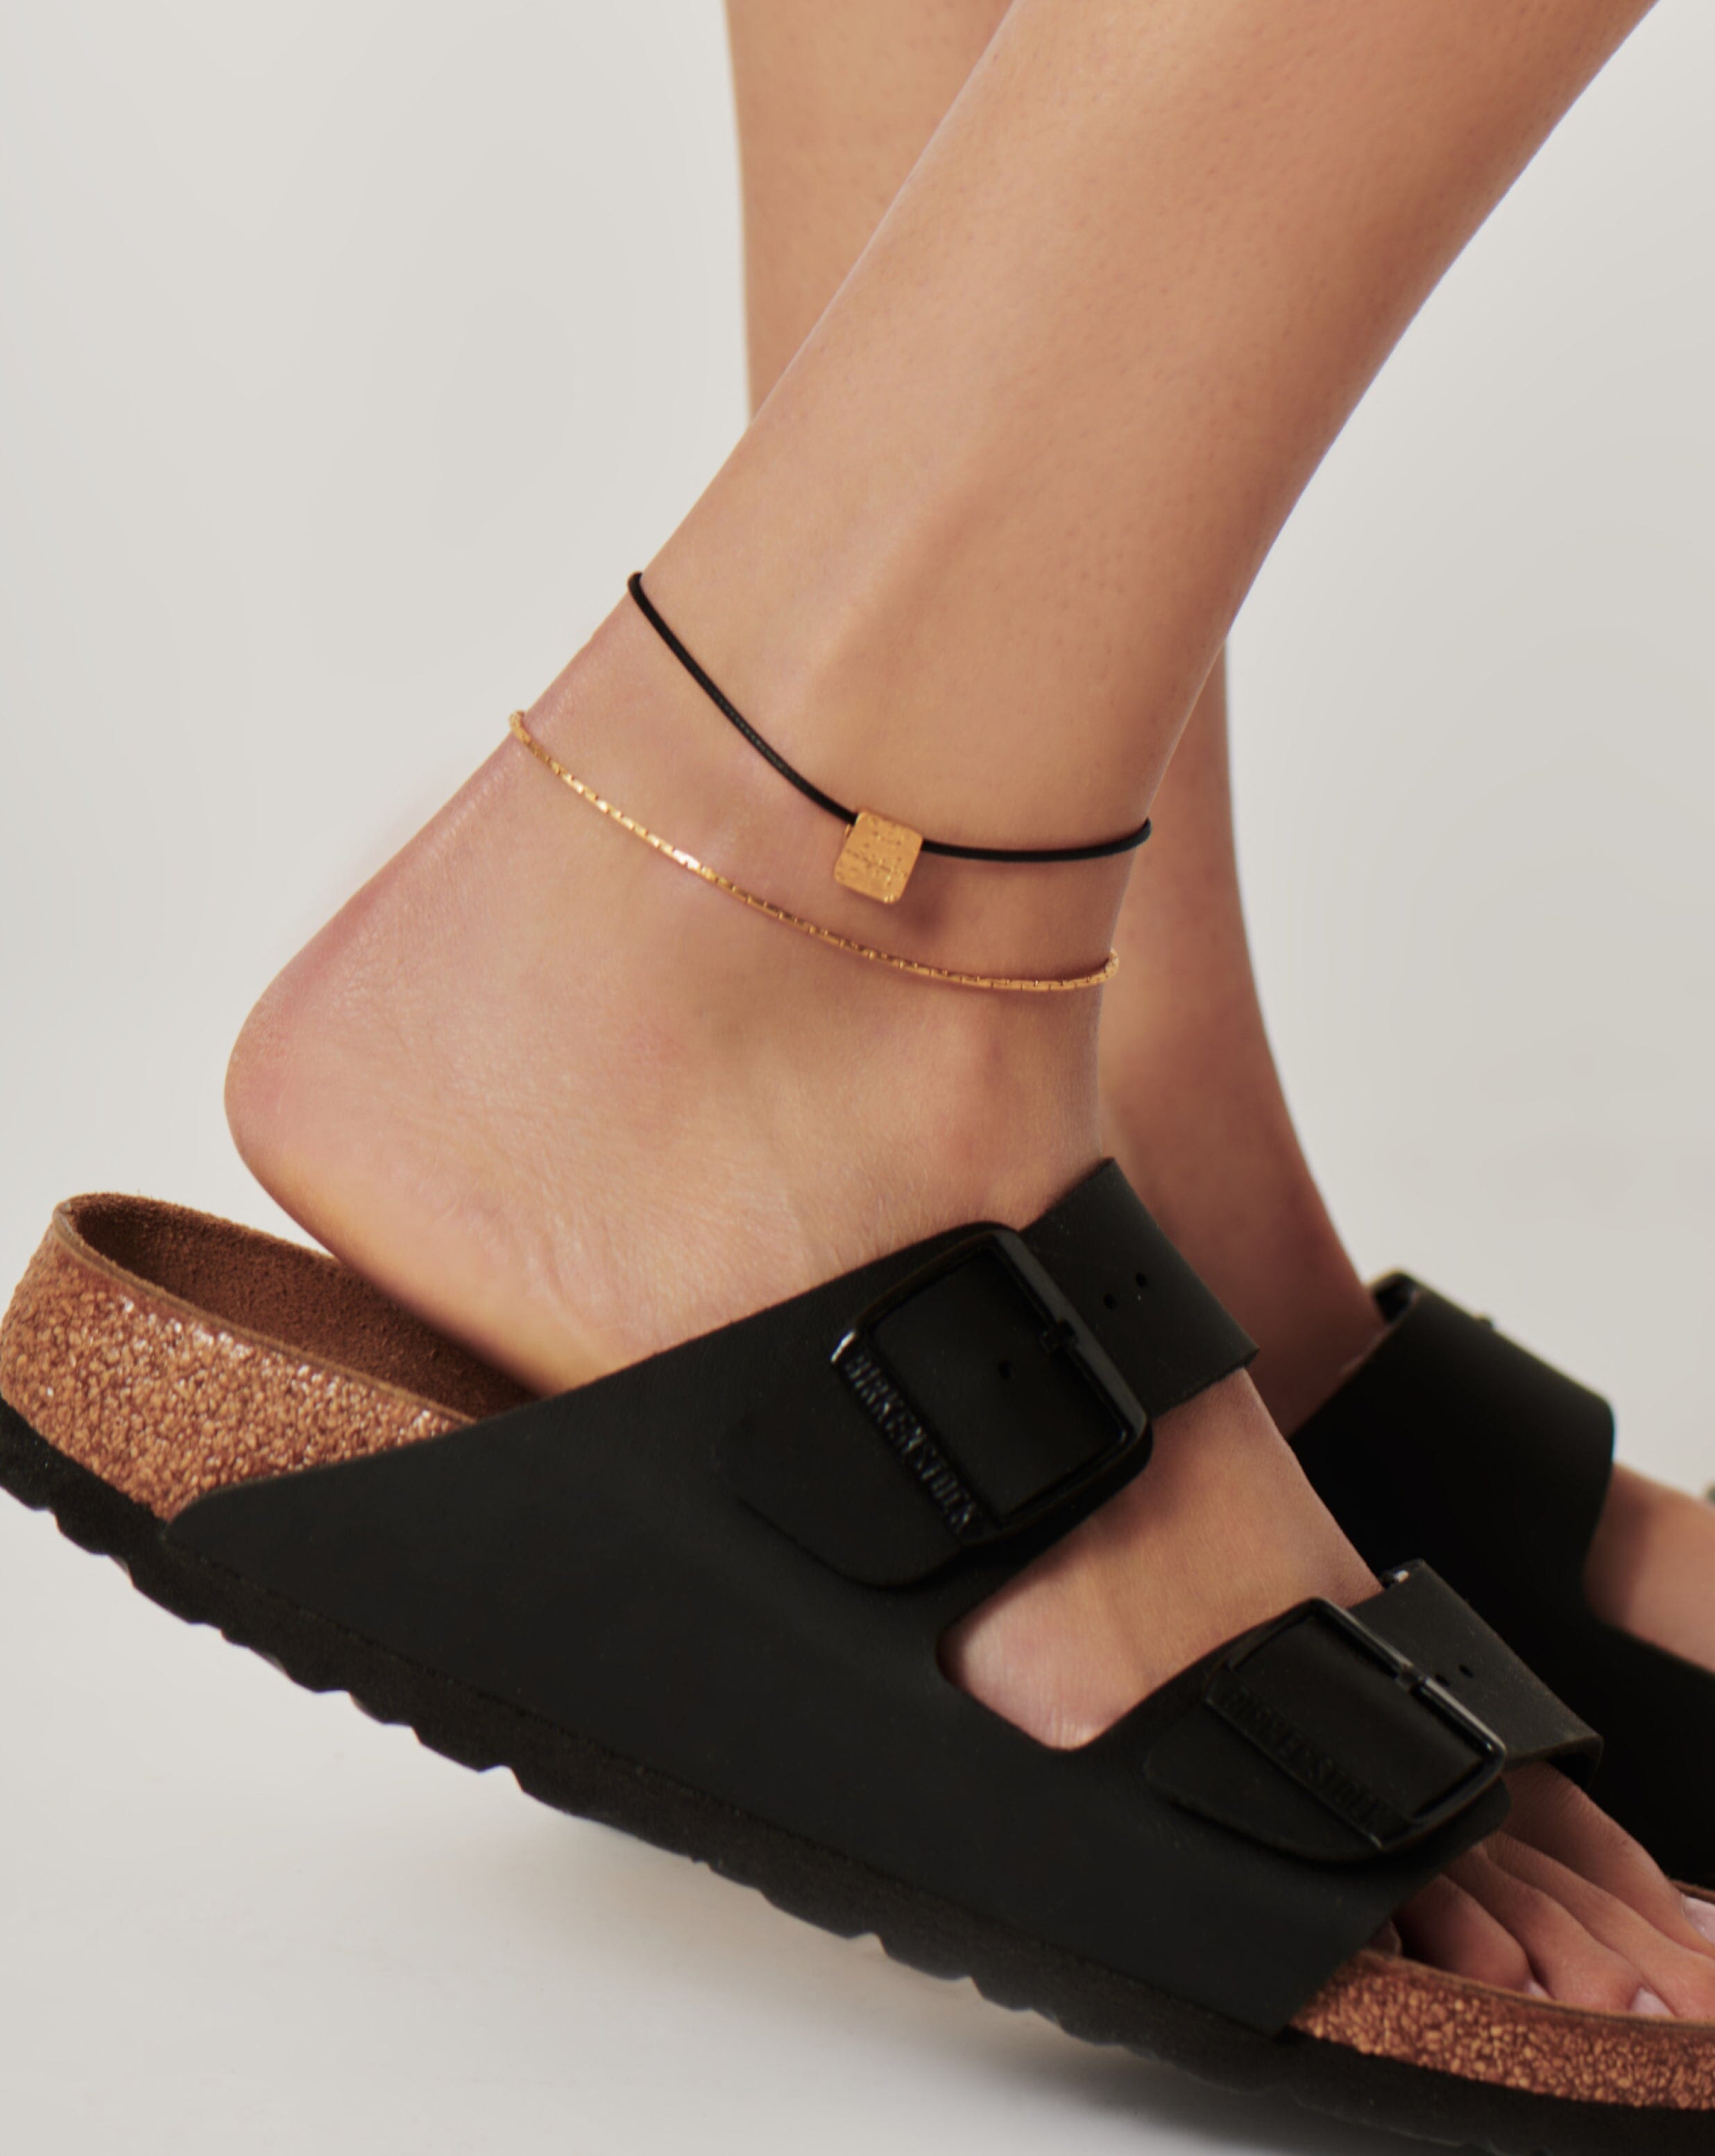 Lucy Williams Cobra Snake Chain Anklet |18ct Gold Plated Anklets Missoma 